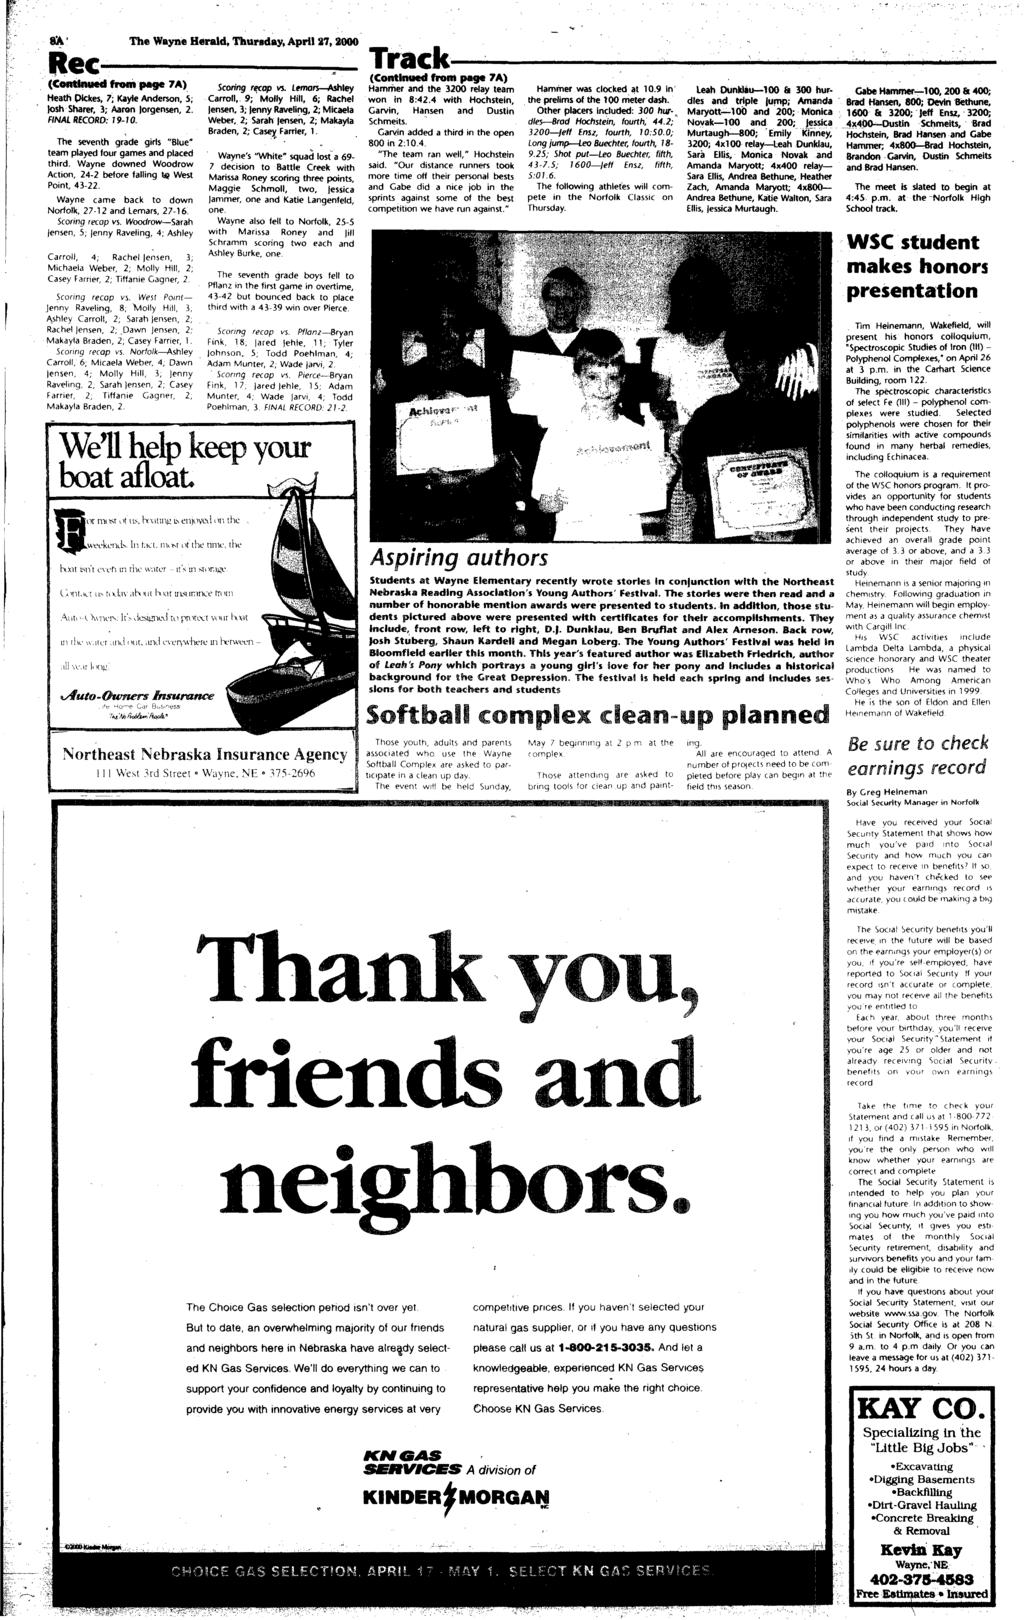 n' The Wayne Herald, Tbu..aday, April 27, 2000 Rec------- (continued from page 7A) Heath Dickes, 7; Kayle Anderson, S; Josh Sharer, 3; Aaron Jorgensen, 2. FNAL RECORD: 19-10.